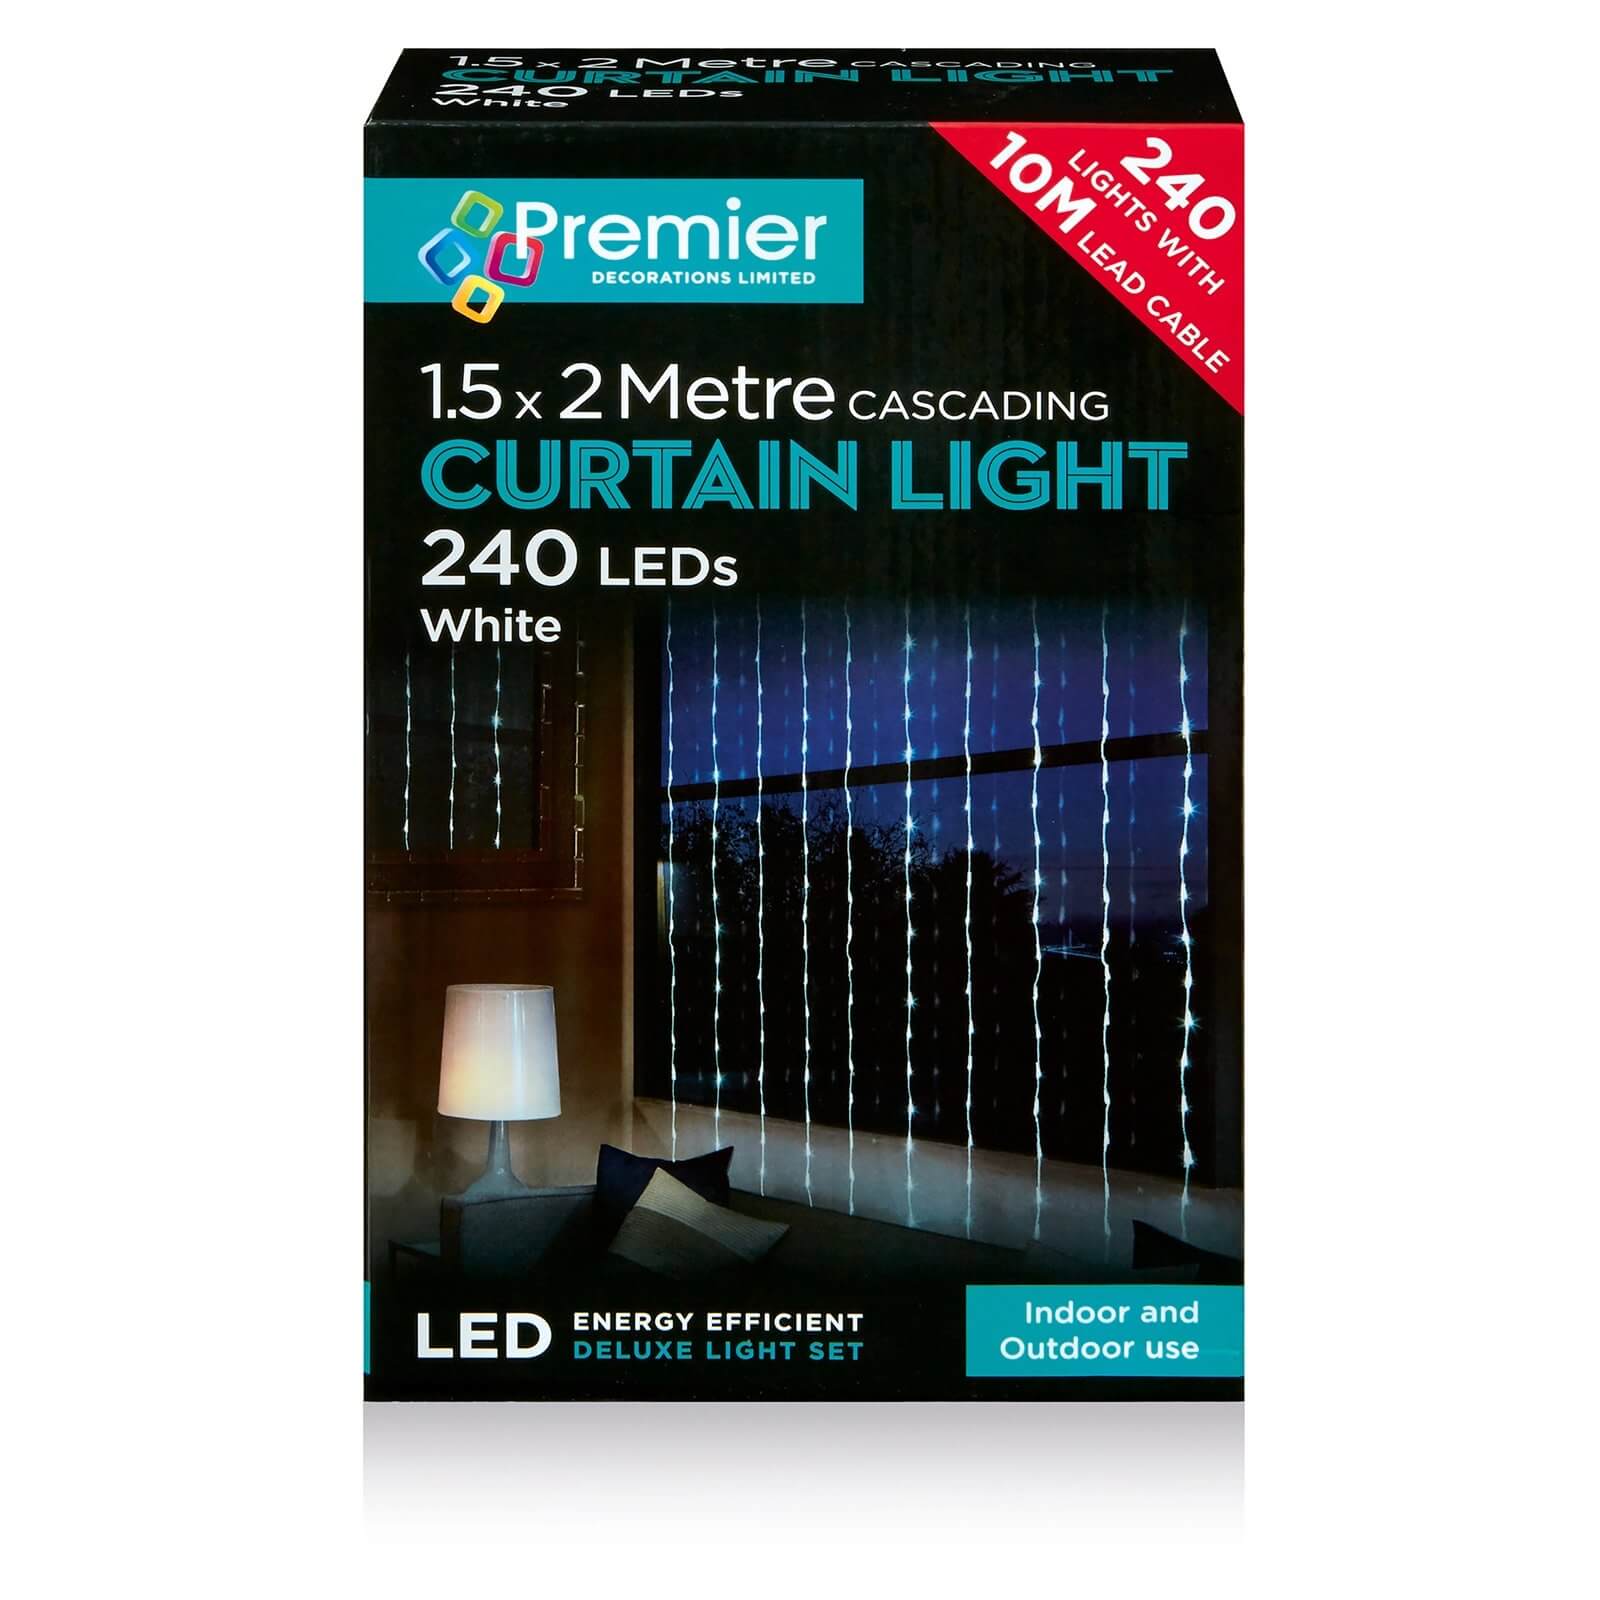 240 Multi - Action Waterfall Lights With White LEDs